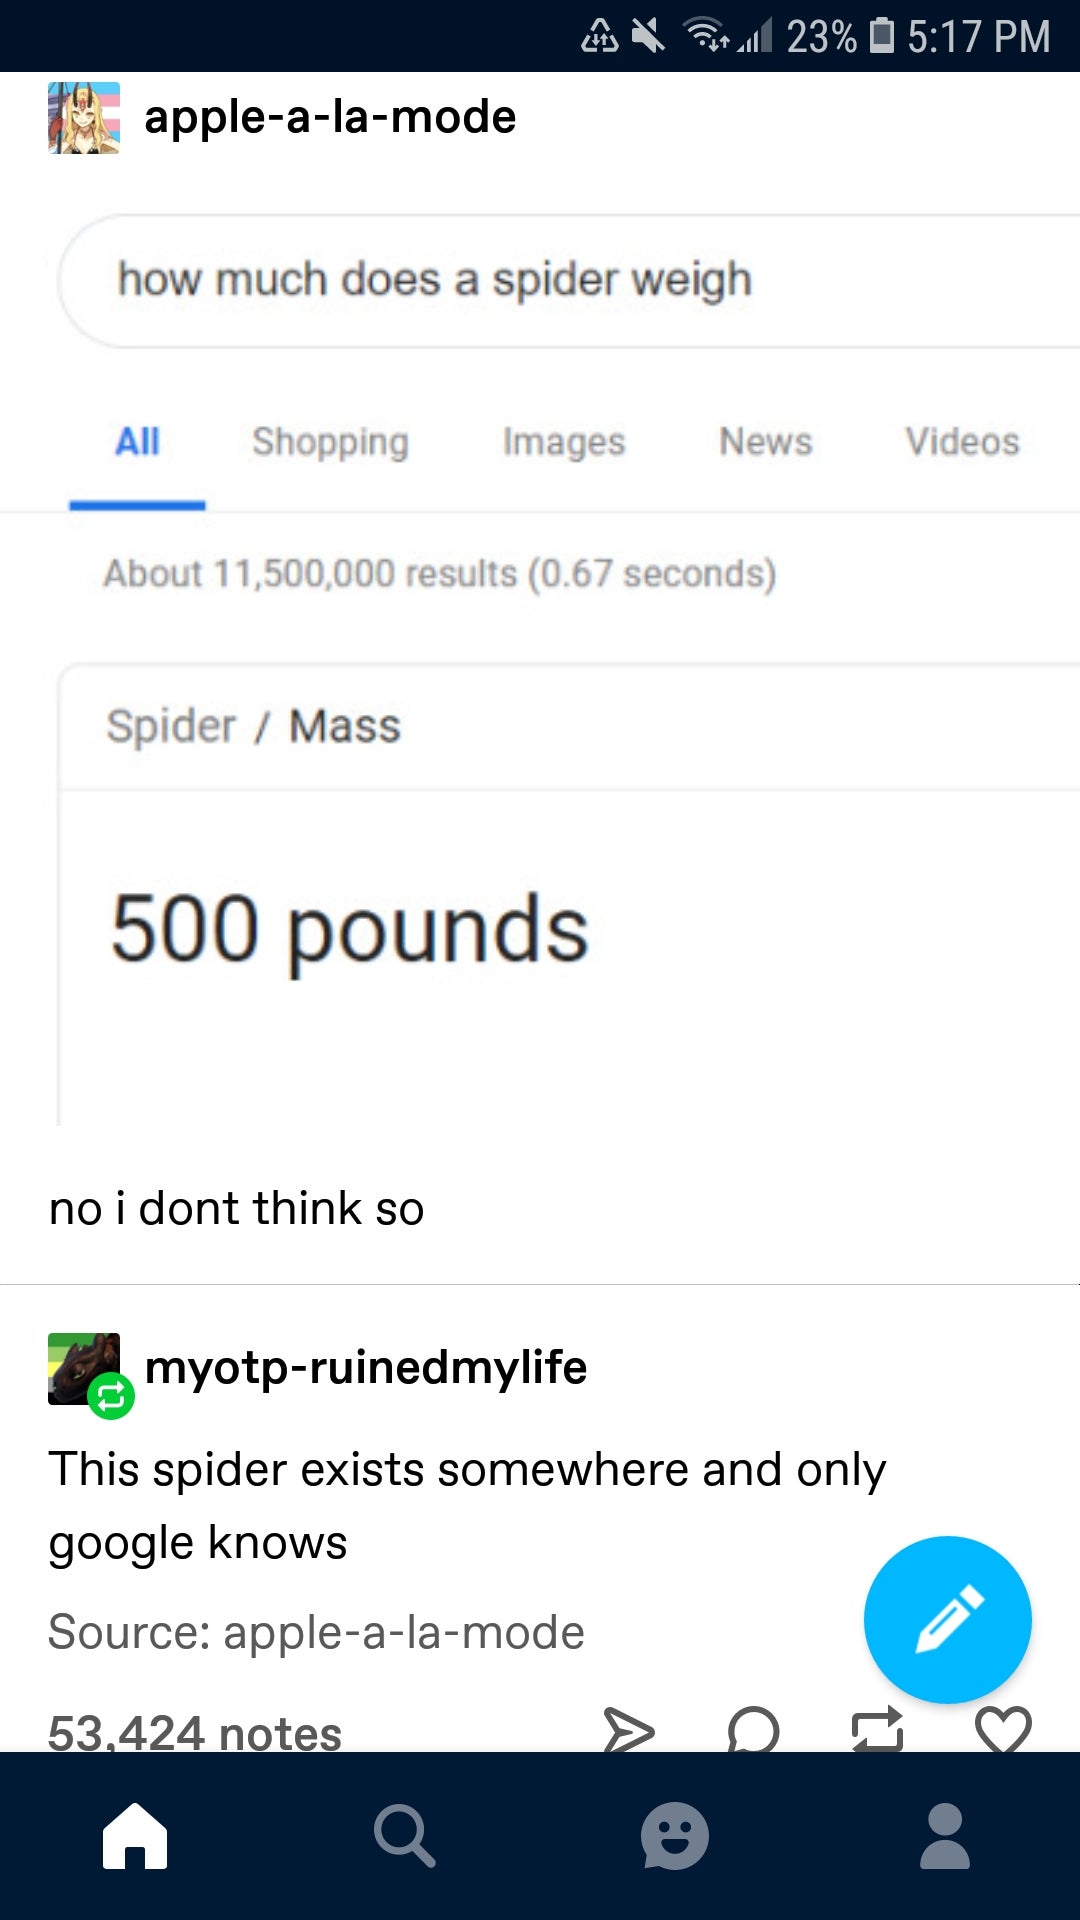 screenshot - mm Put od 23% applealamode how much does a spider weigh All Shopping Images News Videos About 11,500,000 results 0.67 seconds Spider Mass 500 pounds no i dont think so myotpruinedmylife This spider exists somewhere and only google knows Sourc